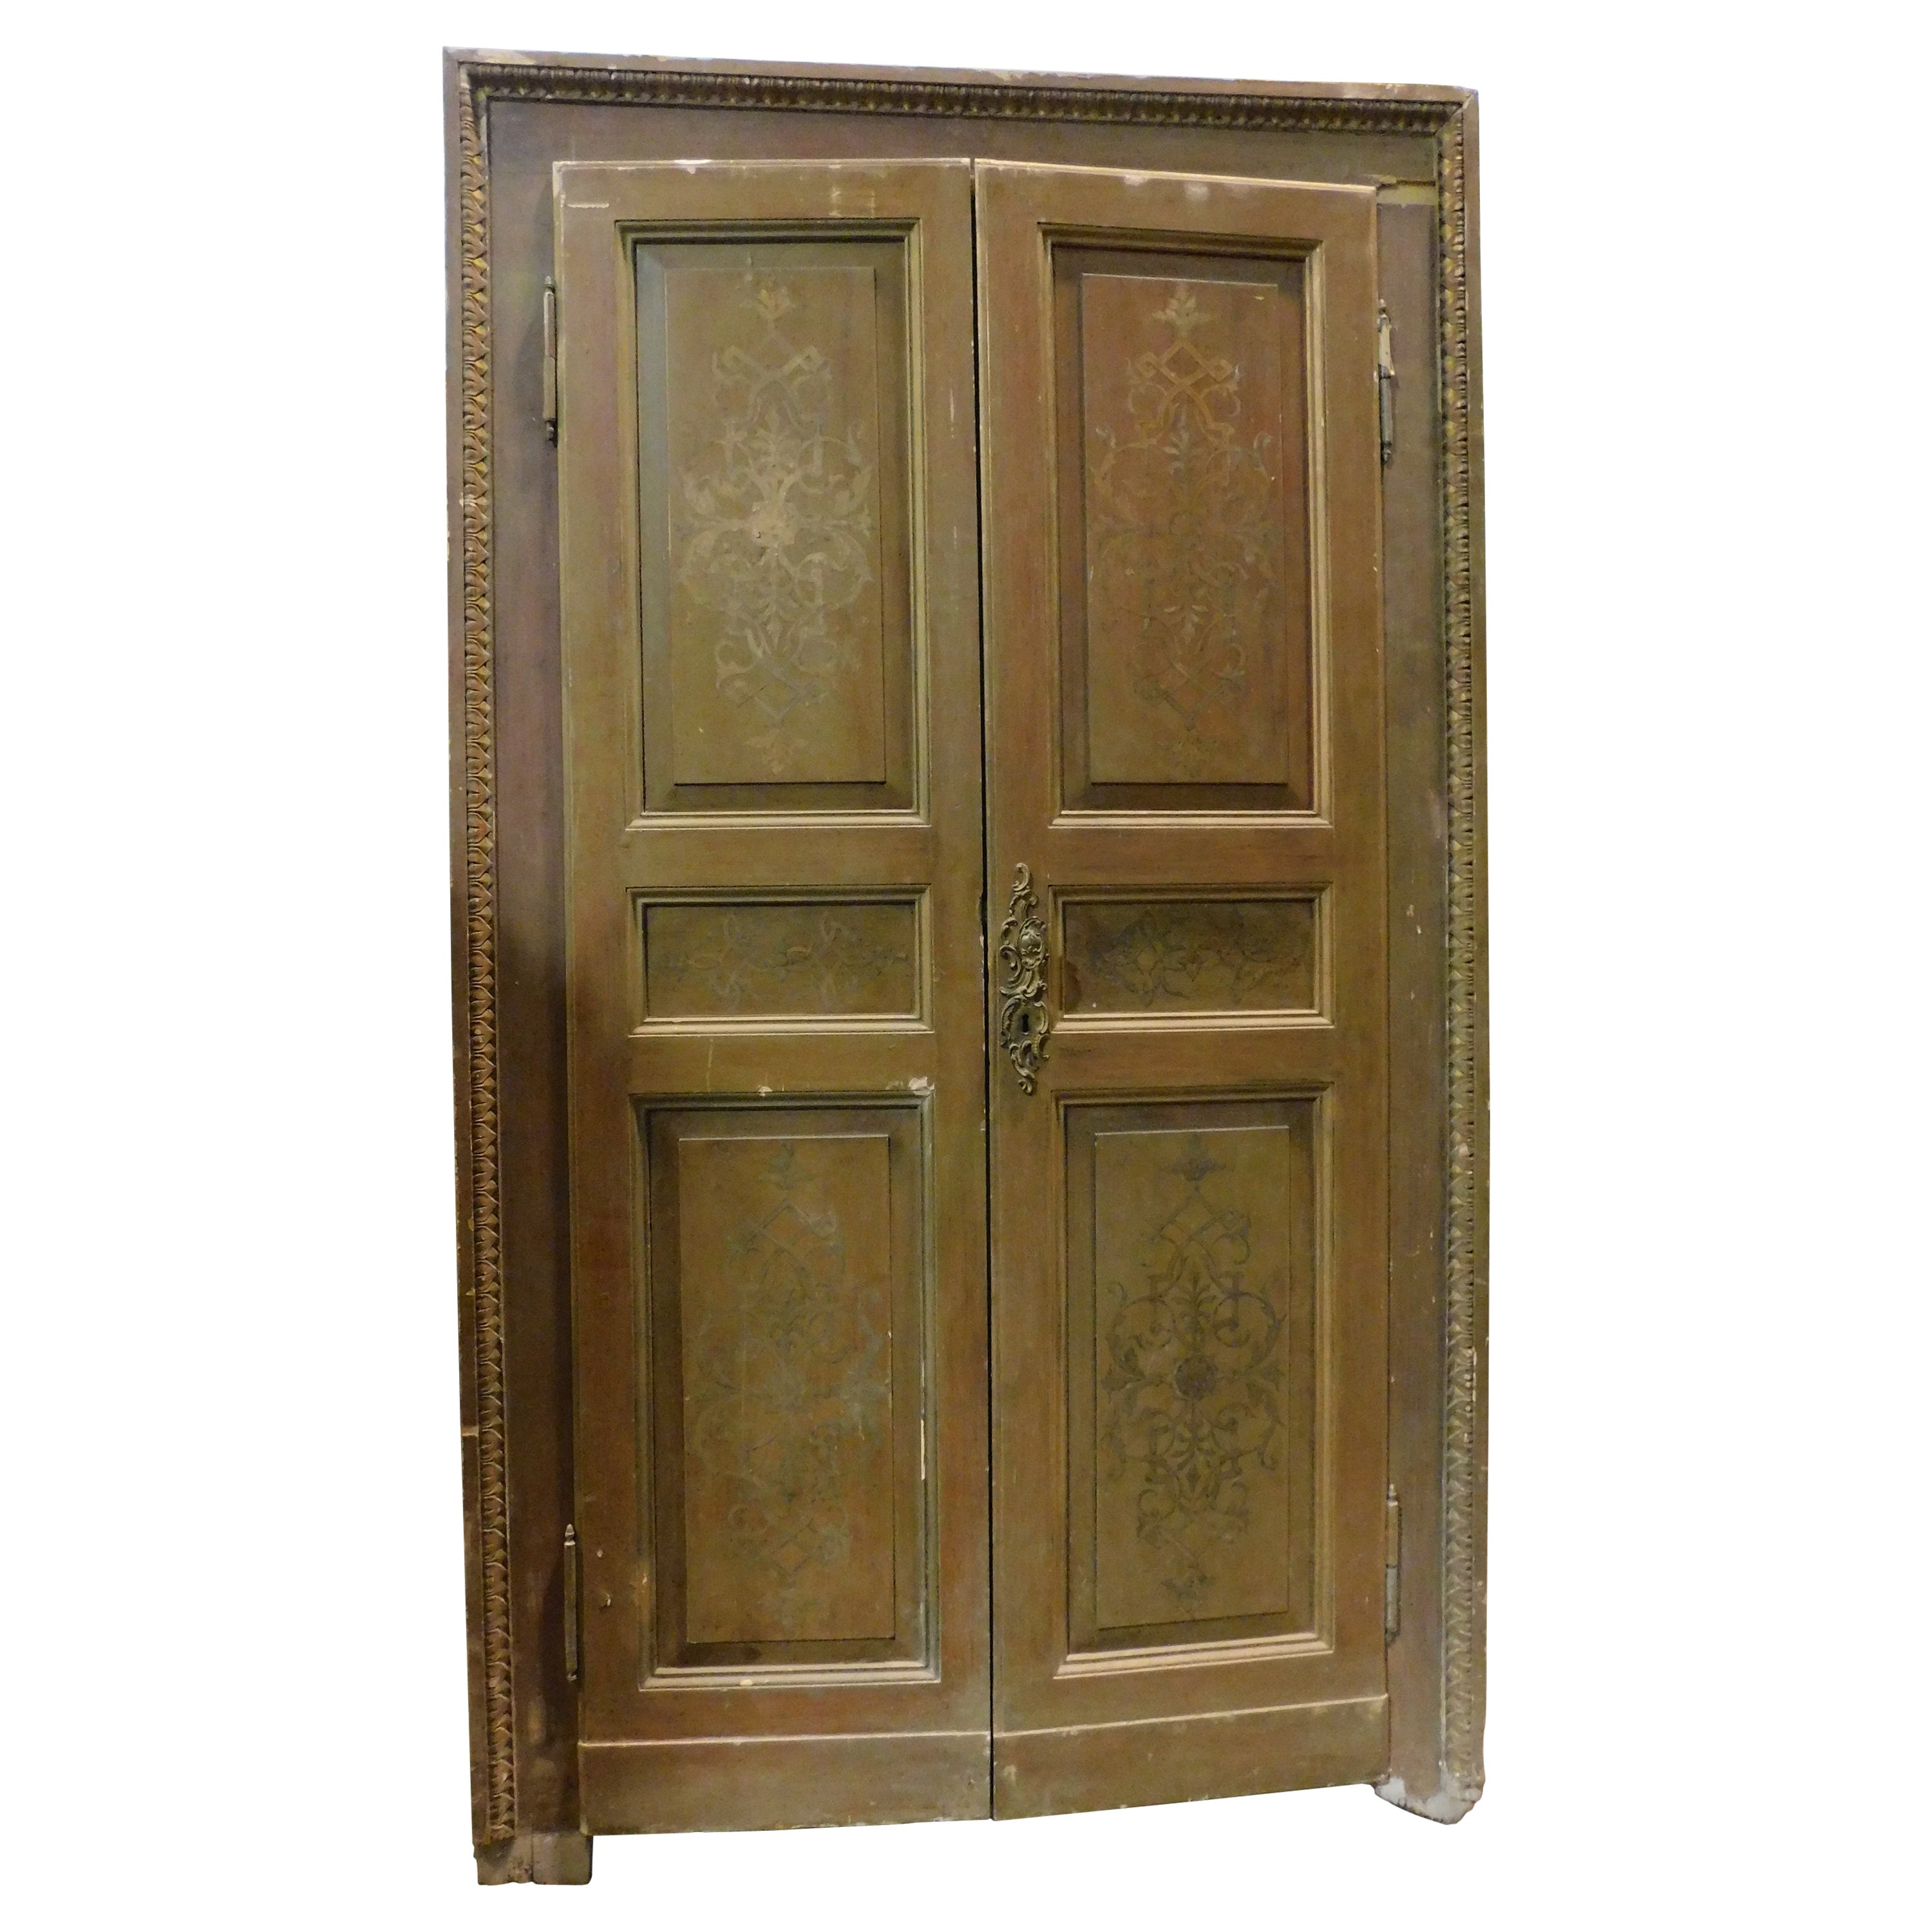 n.4 double doors with frame , lacquered and carved, late 19th century Italy